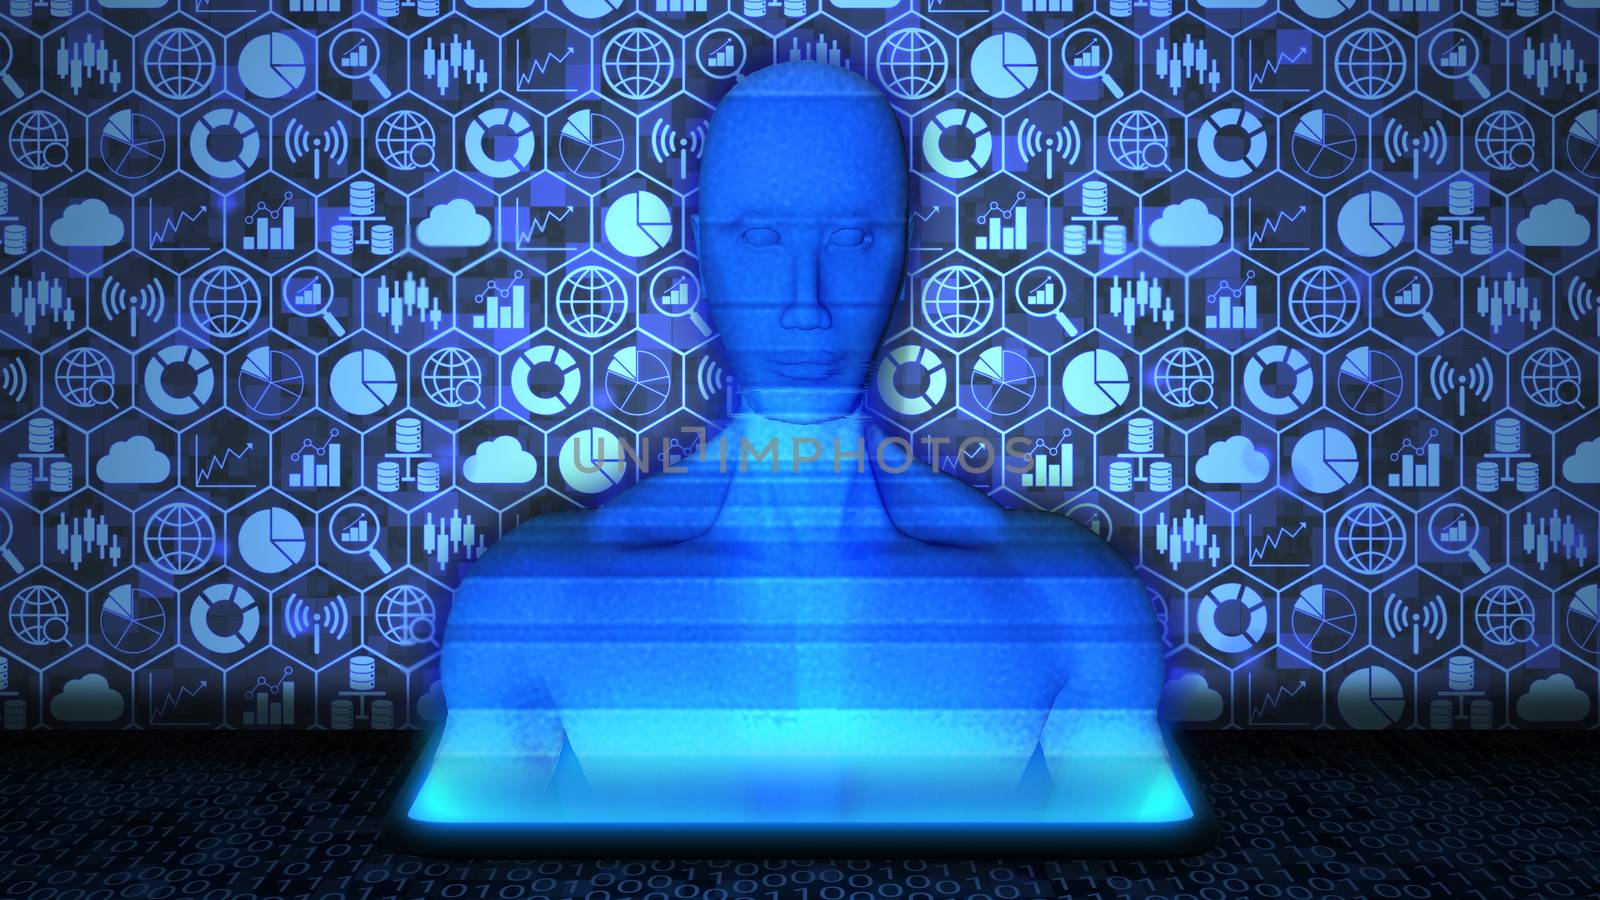 8K 3D Rendered AI/Human Hologram projected from Smartphone on the floor with Big Data Technology icon set Background and Random Binary Code on the floor in blue color